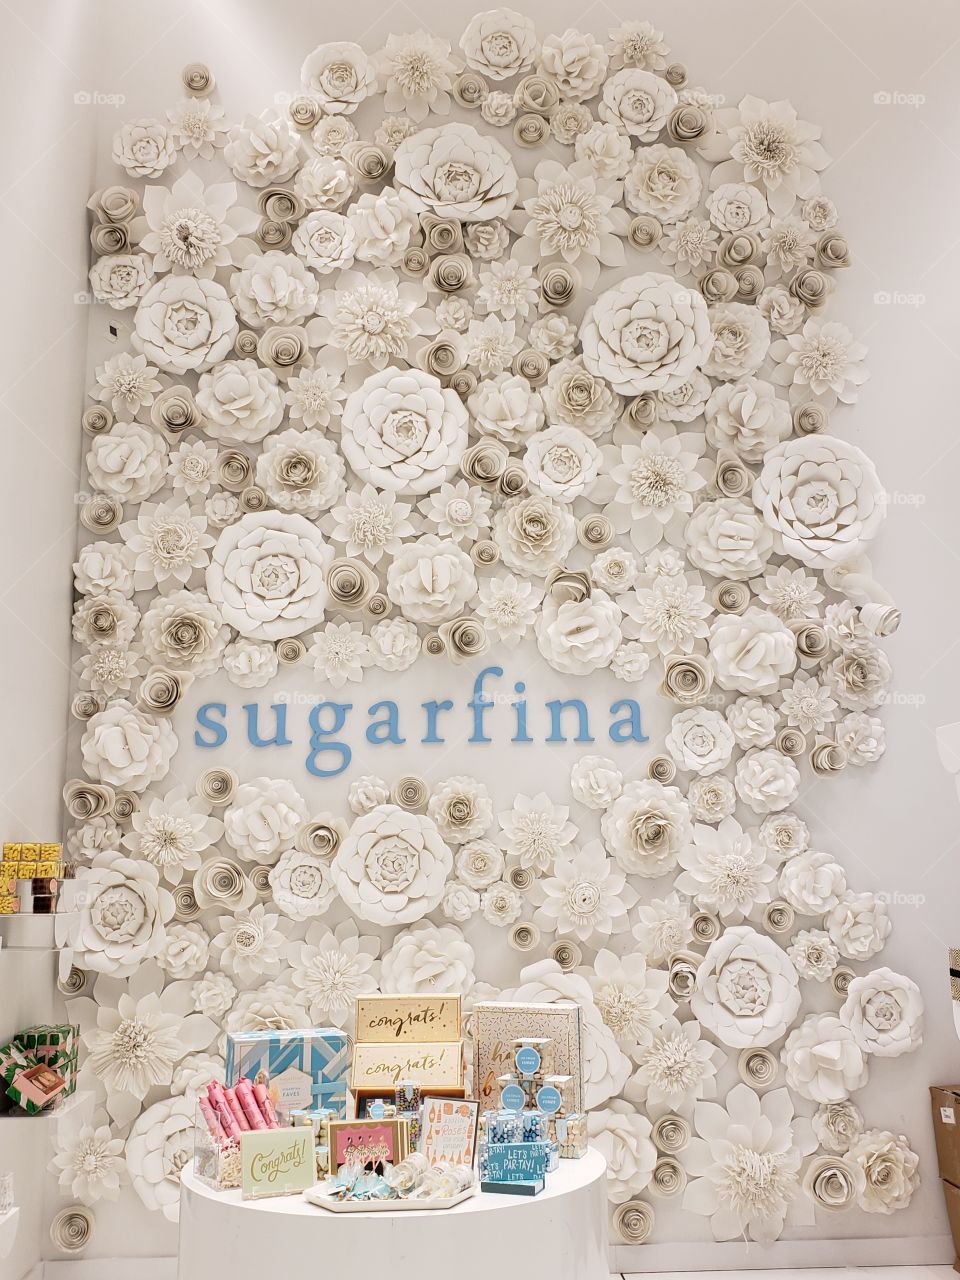 This was taken inside the Oculus in Nyc. The Sugarfina Store where they sell different kind of candies and colourful with the nice packaging. I took a photo of it coz i love the design on how they  made it.